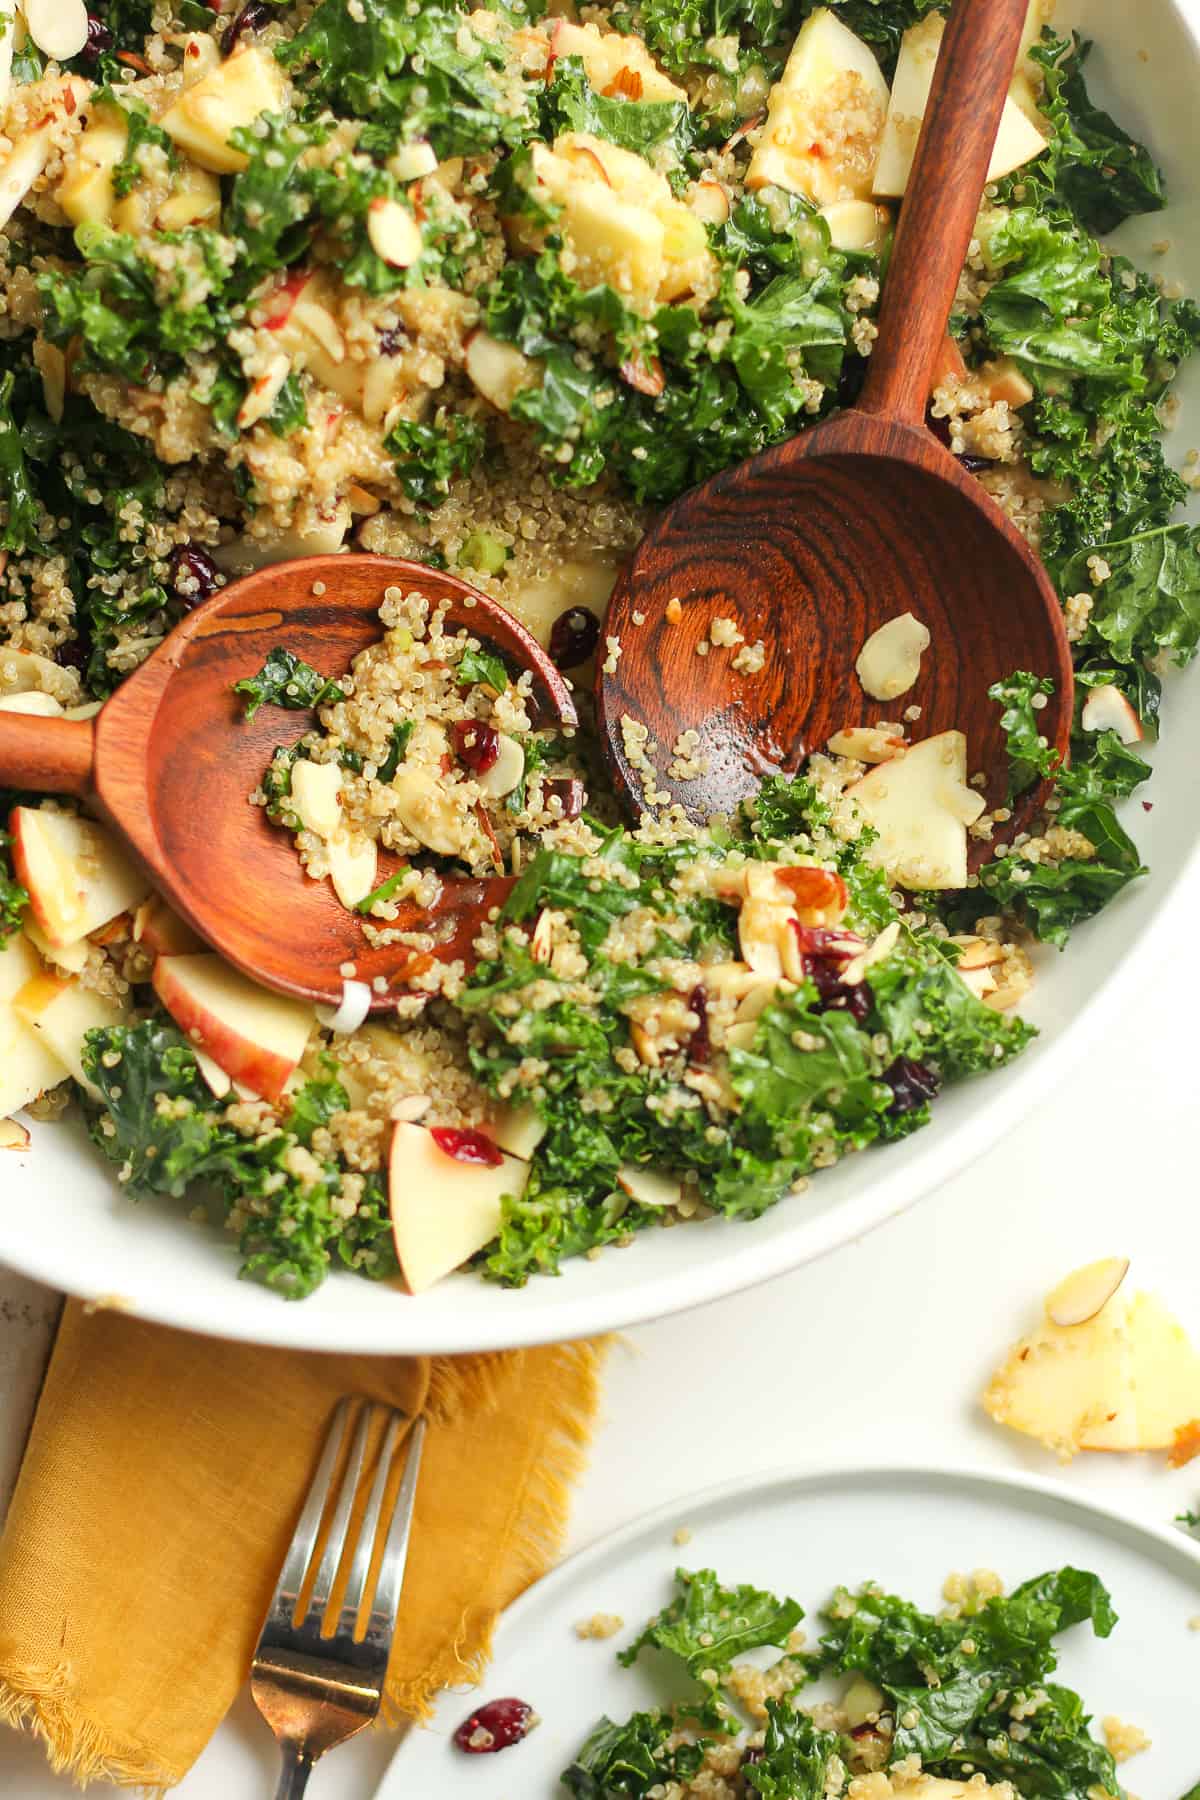 A partial bowl of kale and quinoa salad with wooden spoons.